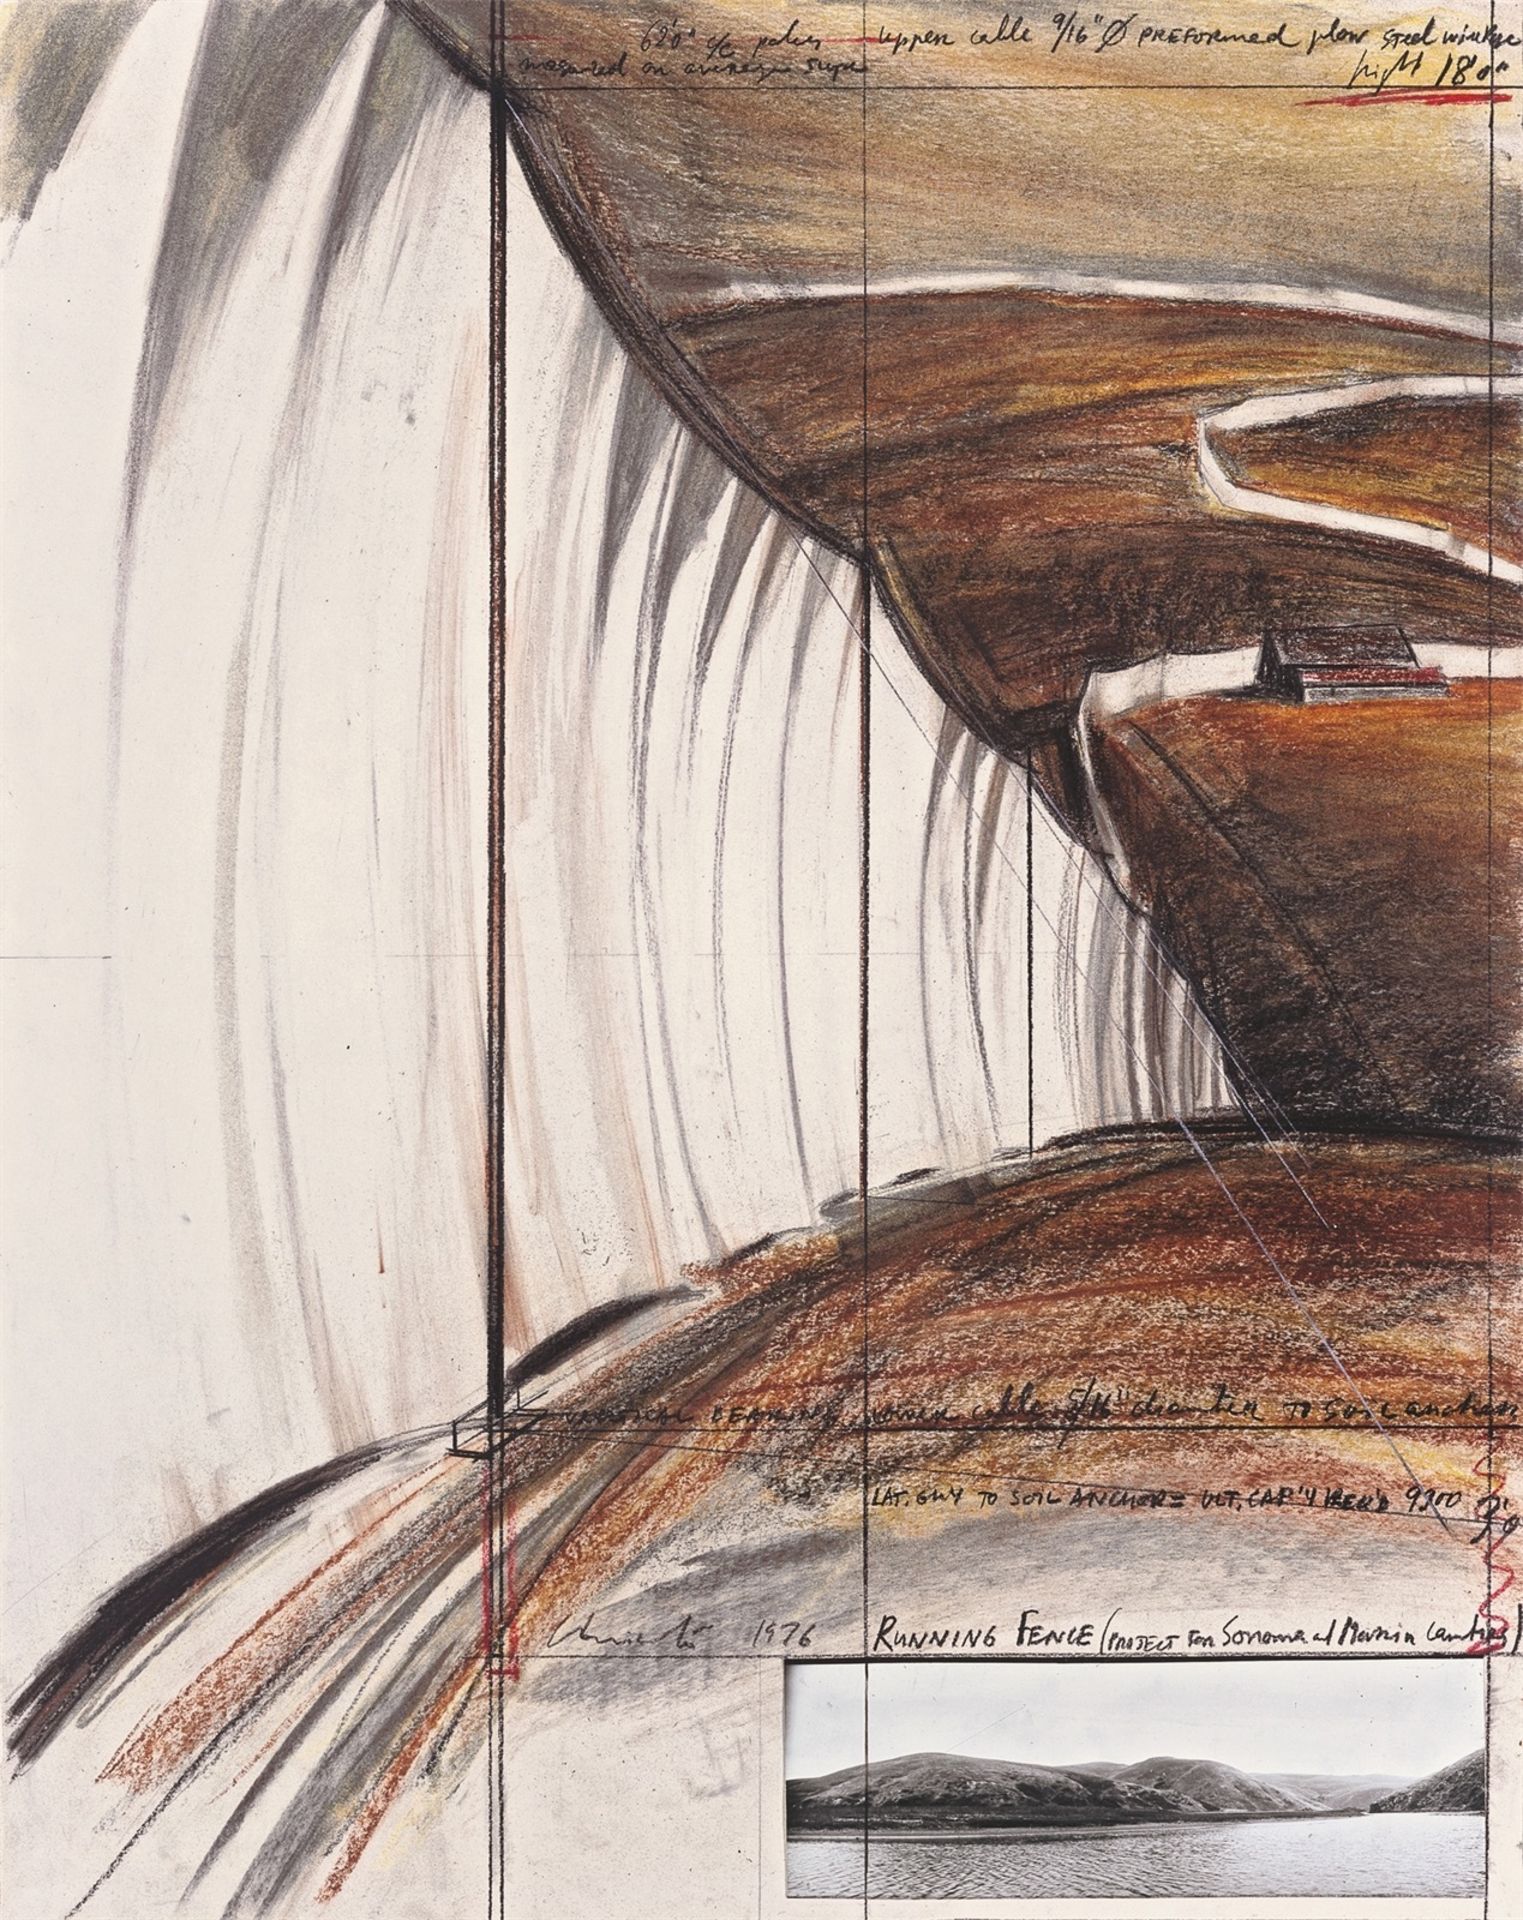 Christo. ”Running Fence (Project for Sonoma and Marin Counties)”. 1976